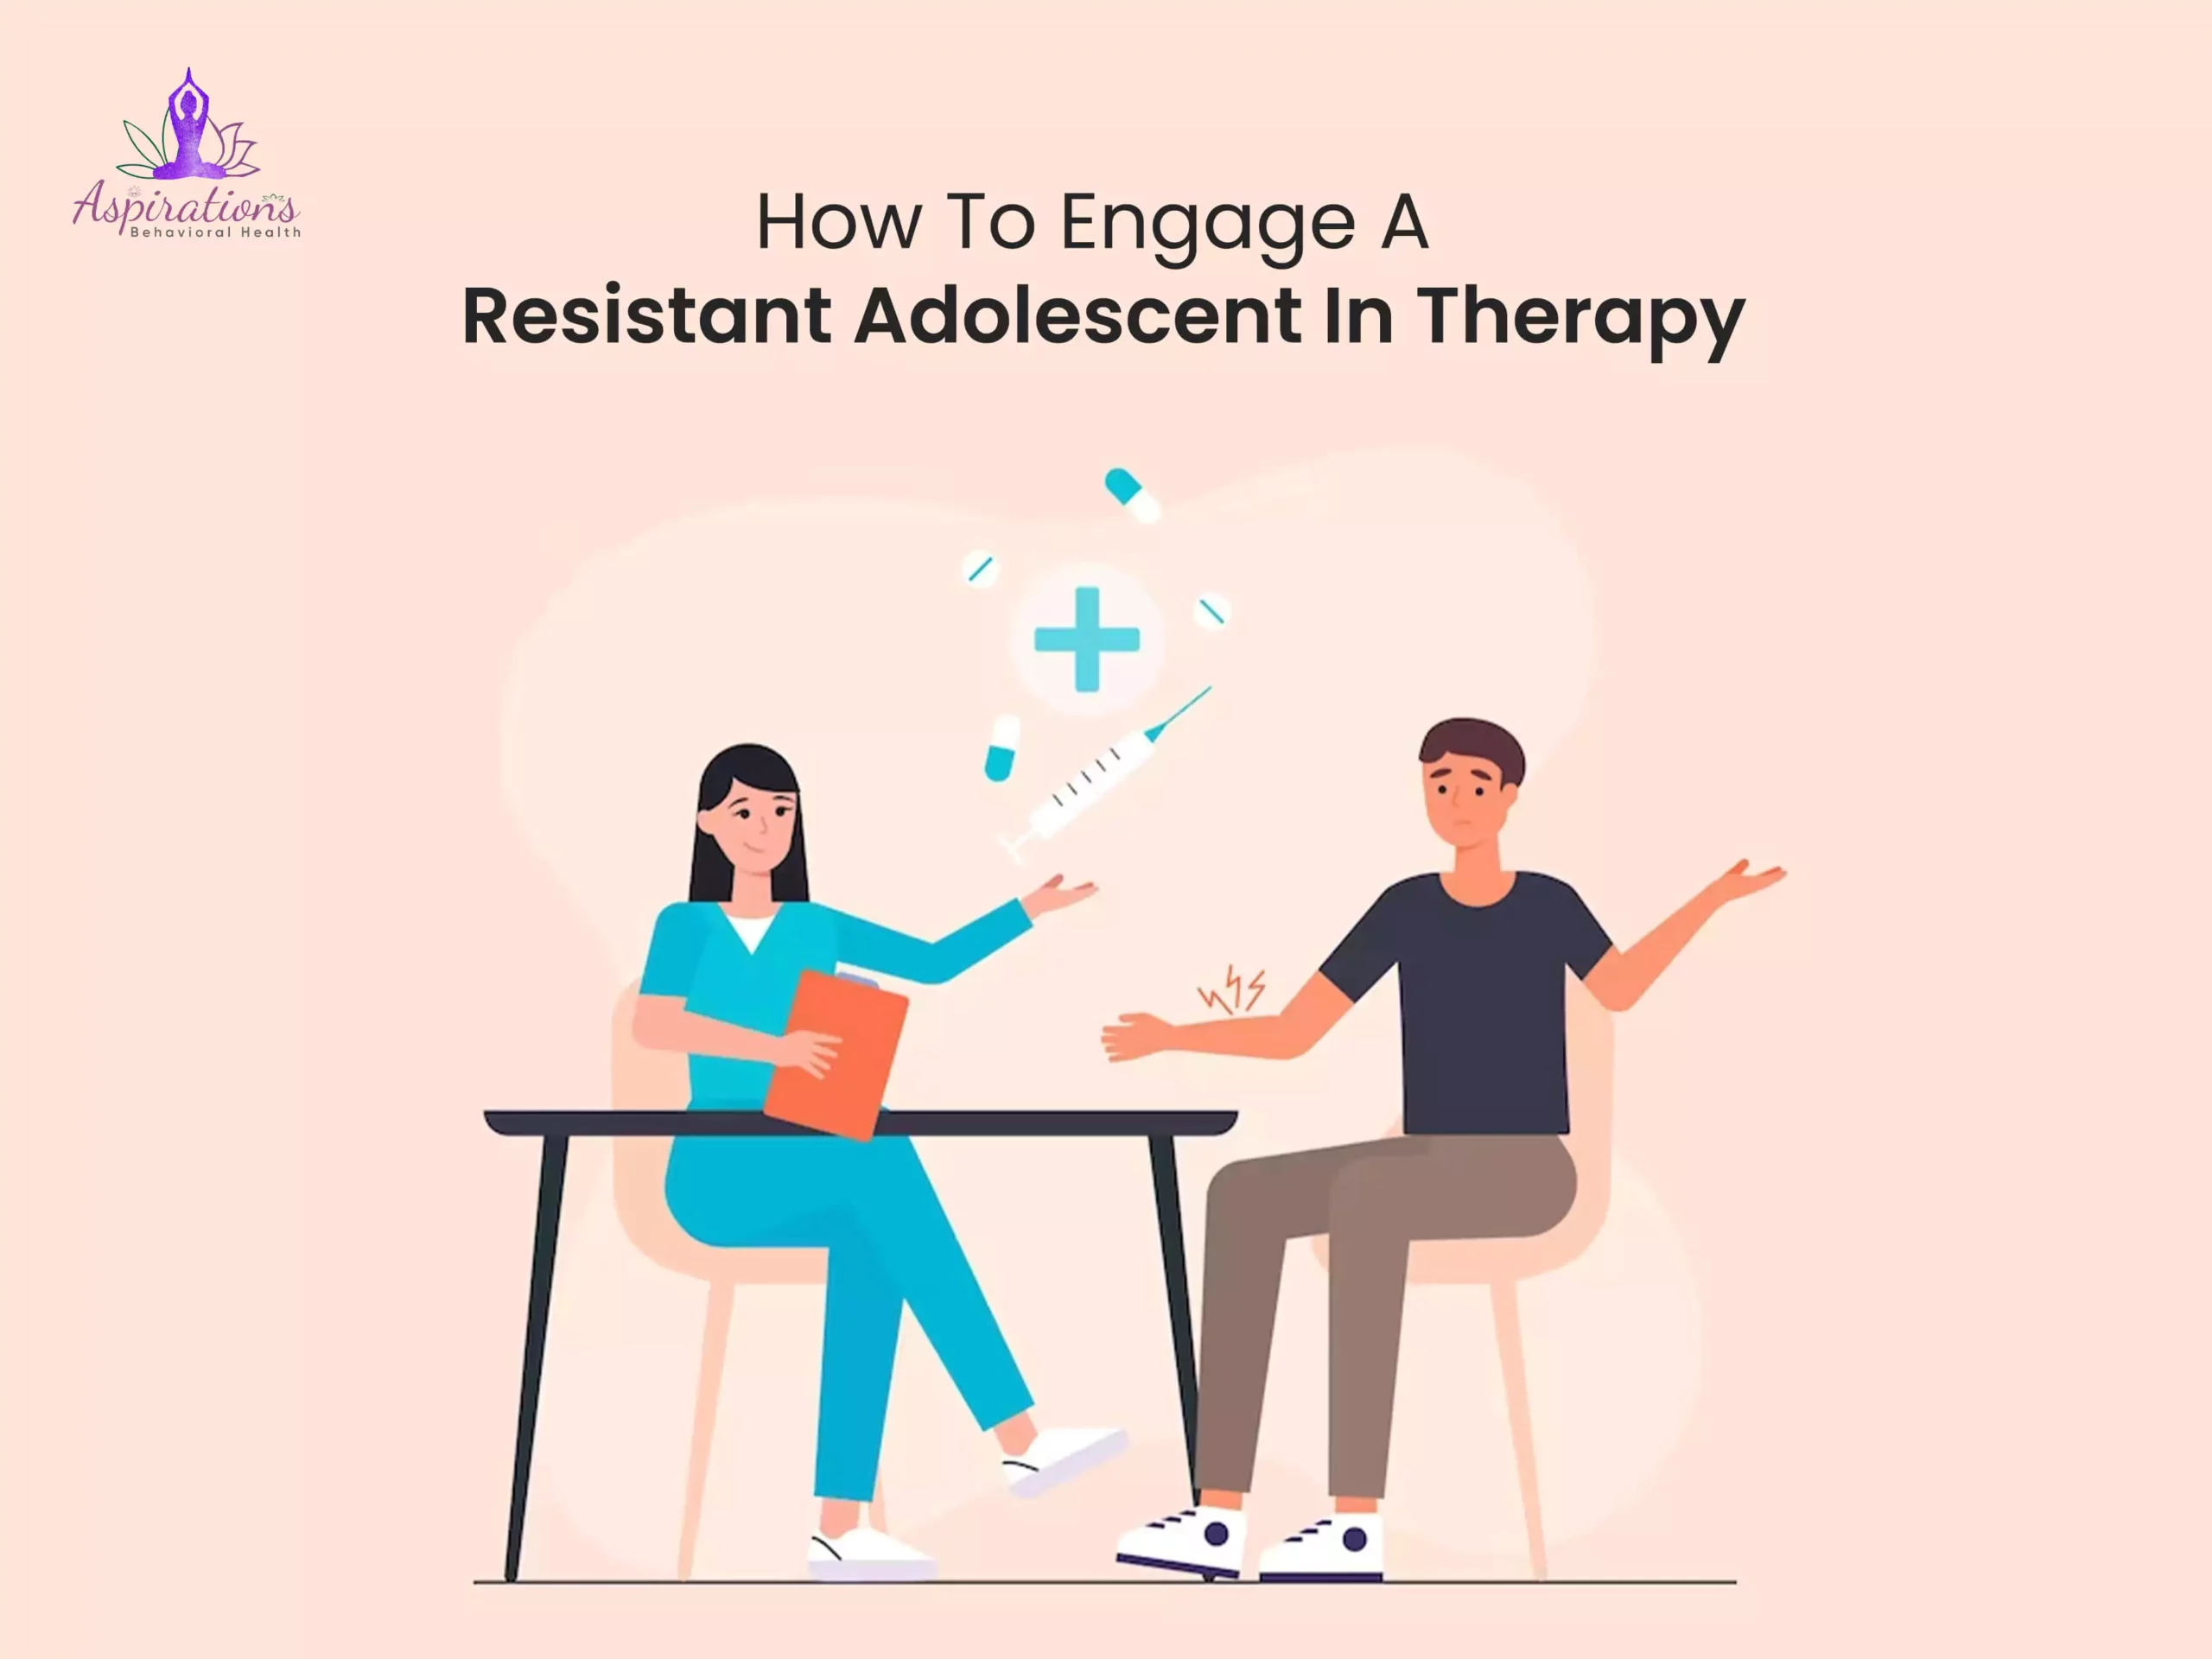 How To Engage A Resistant Adolescent In Therapy